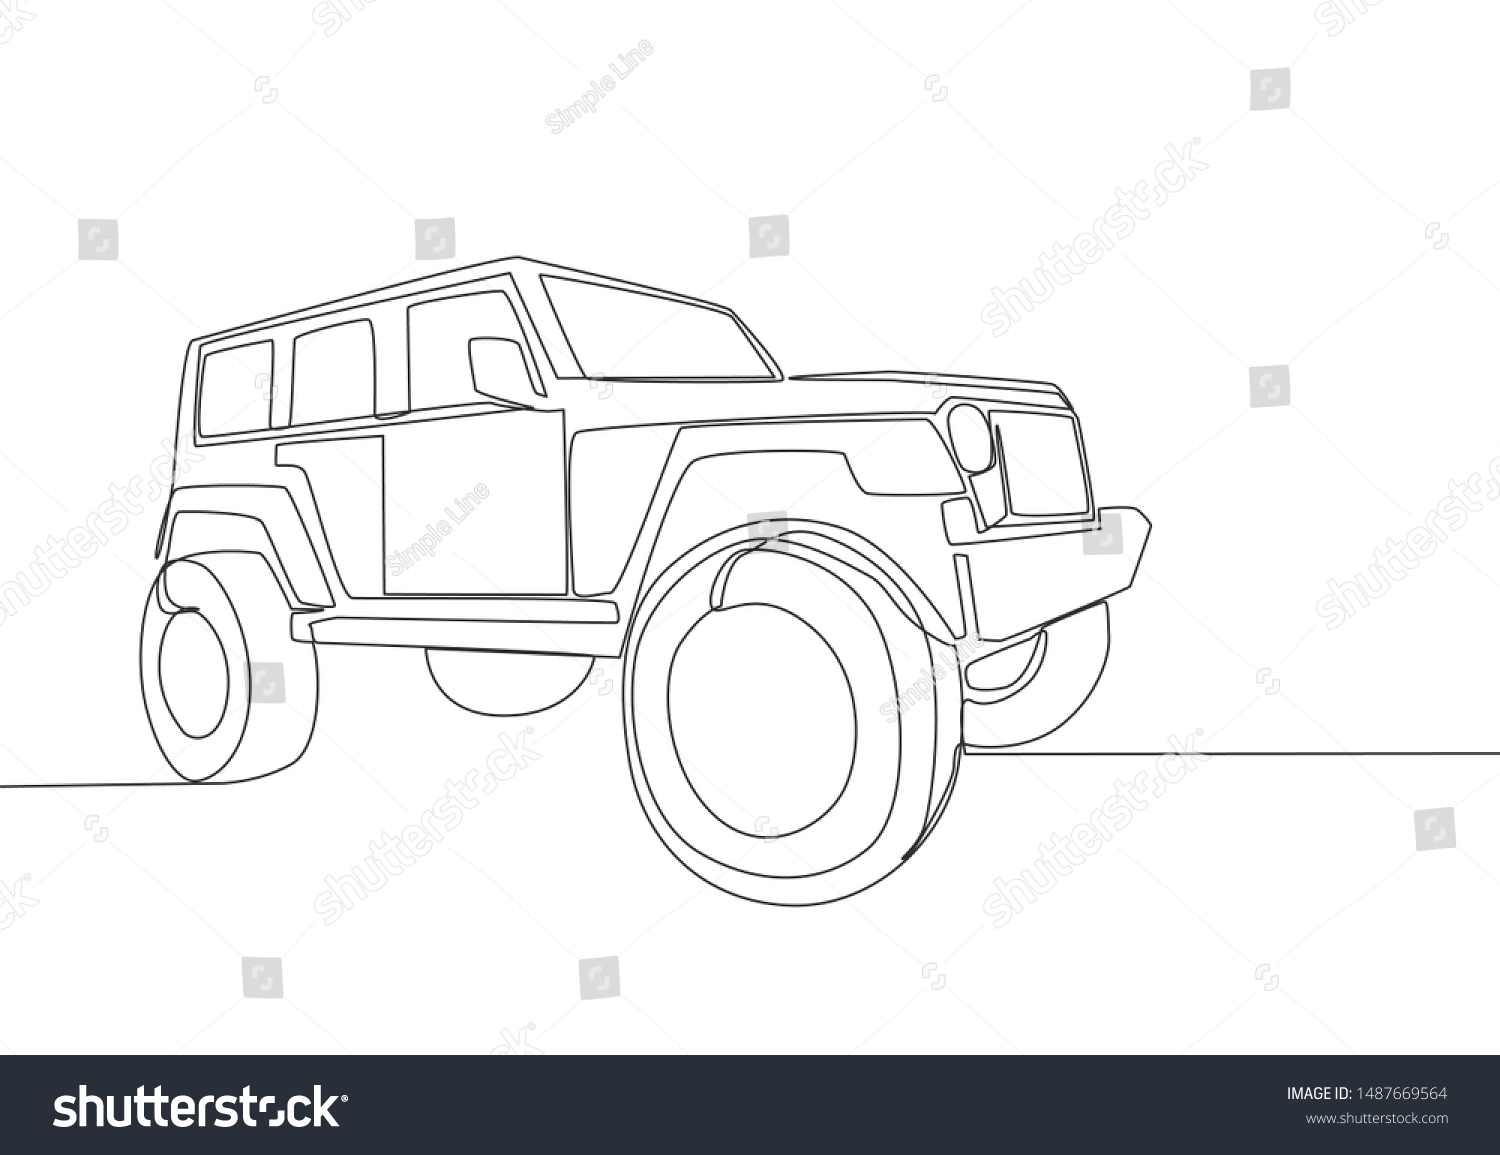 SVG of Single line drawing of 4x4 wheel drive tough jeep wrangler car. Adventure offroad rally vehicle transportation concept. One continuous line draw design svg